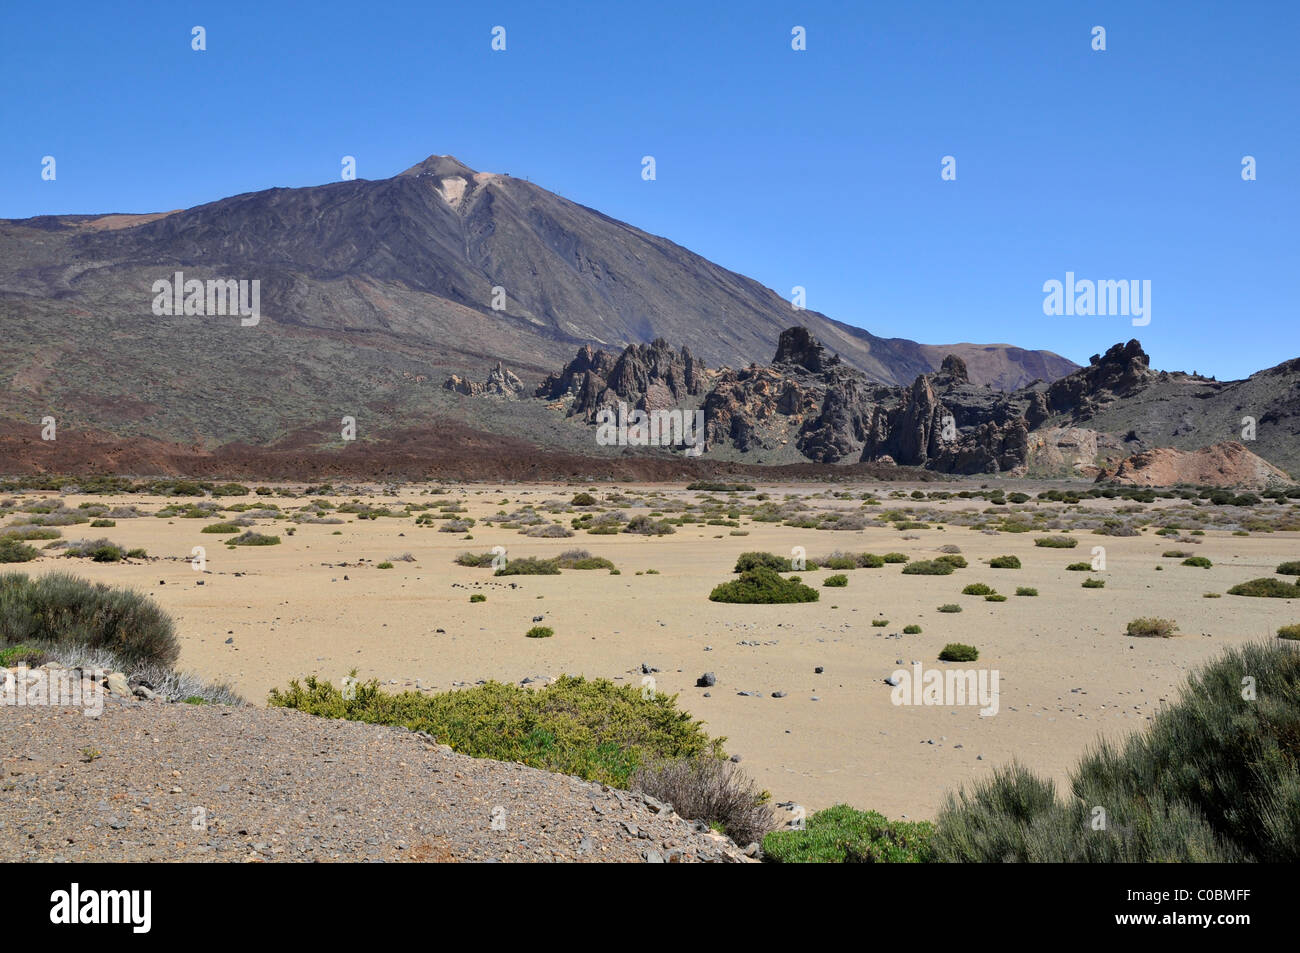 Mount Teide or, in Spanish, Pico del Teide (3718m), is a volcano at Tenerife in the Spanish Canary Islands Stock Photo